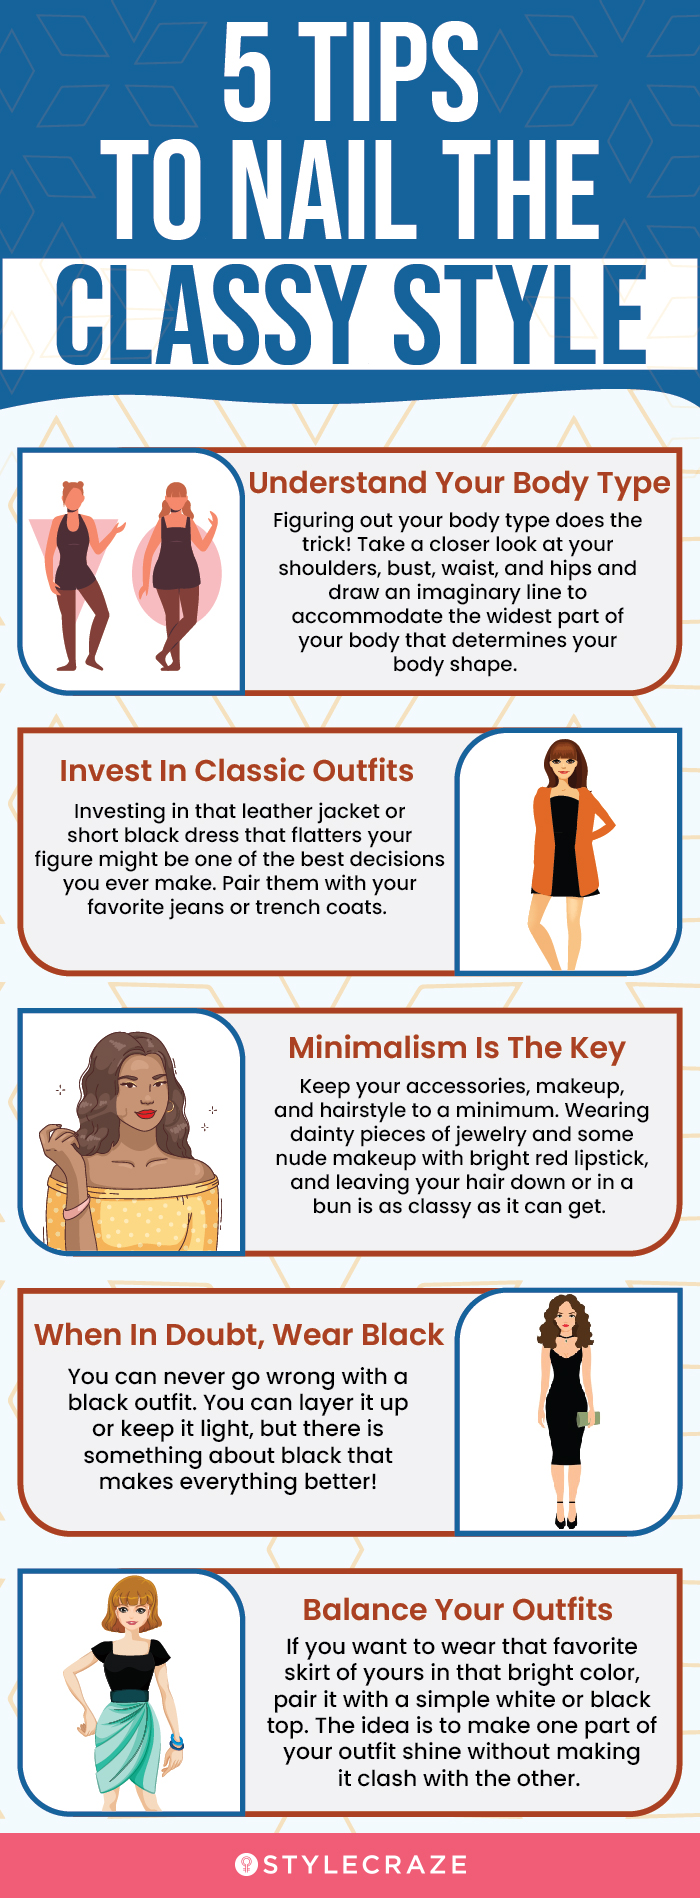 5 tips to nail the classy style (infographic)